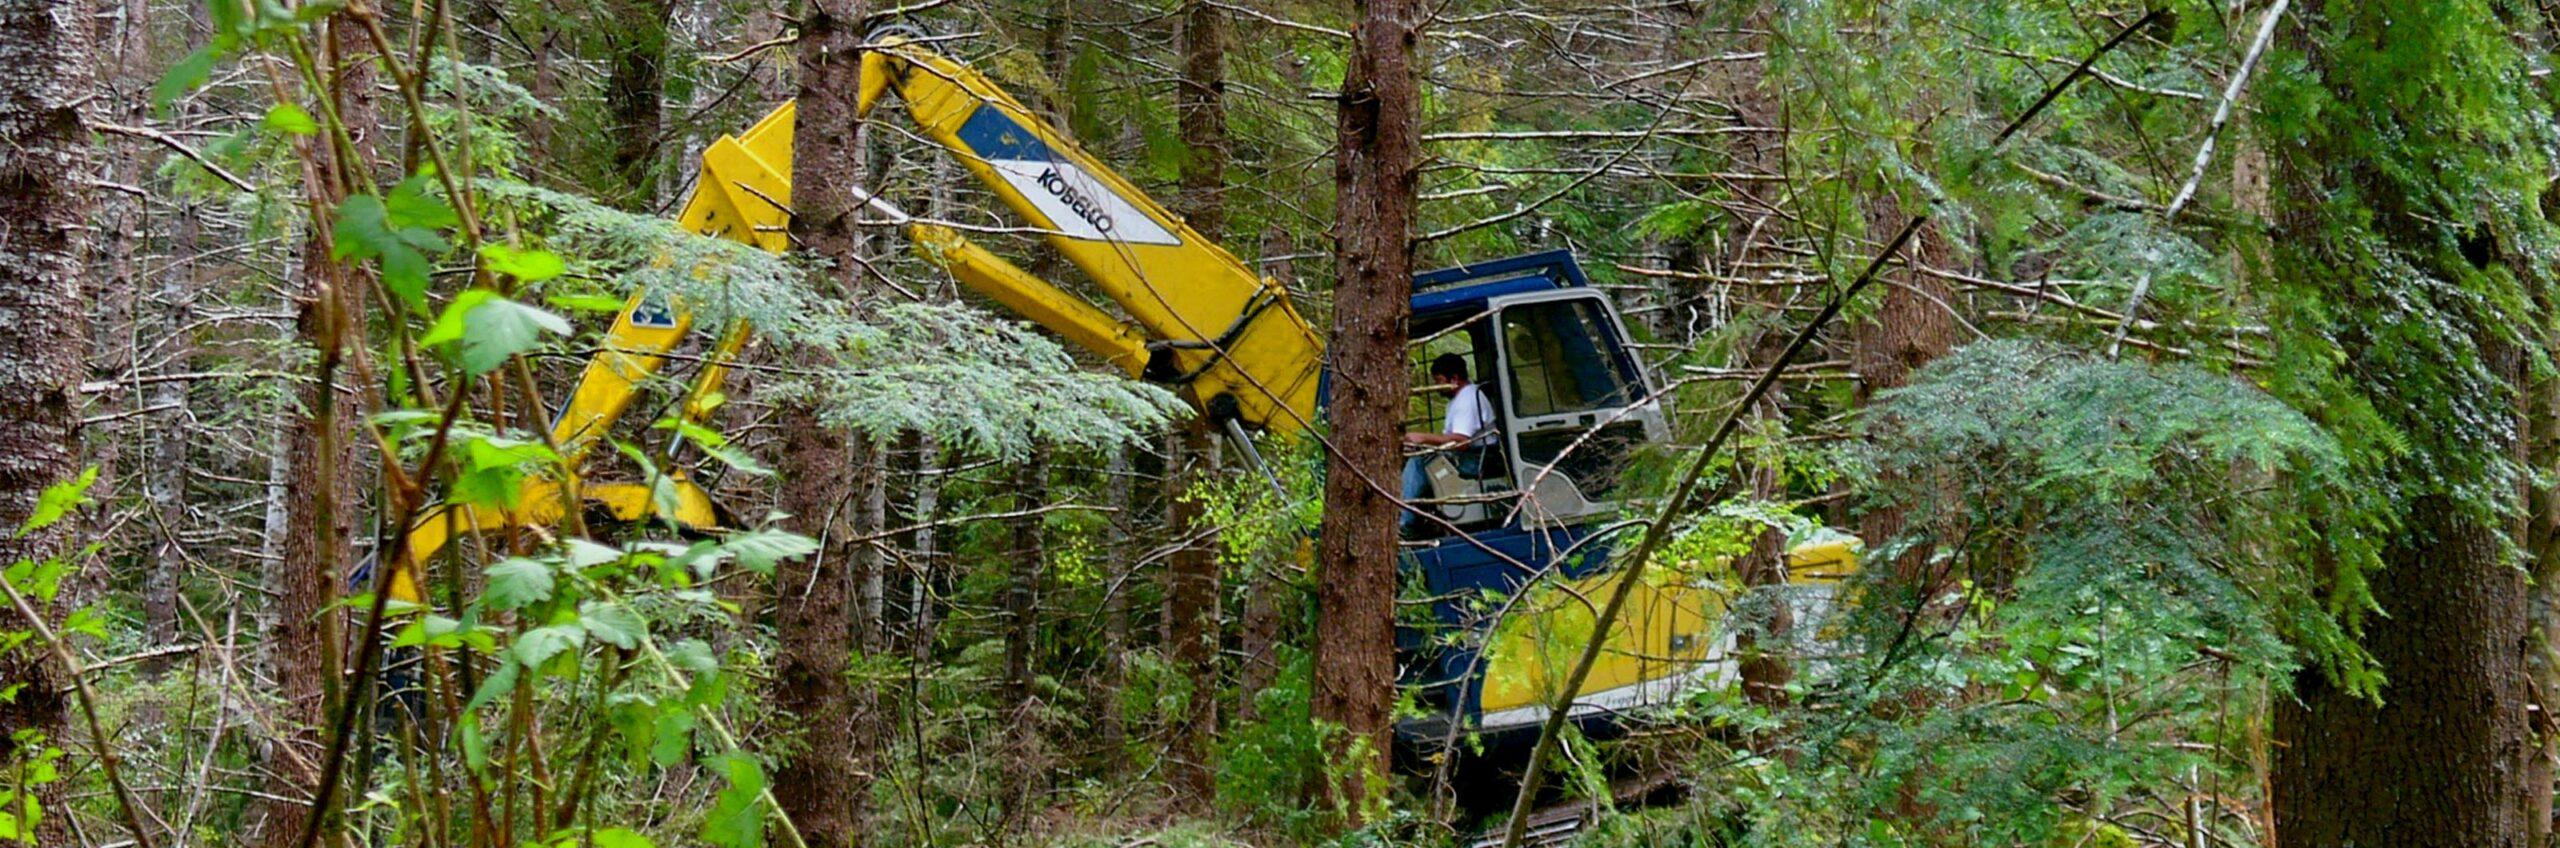 Working machine with a blue cab and yellow arm in the middle of a second growth forest. Person seated in the machine works the arm